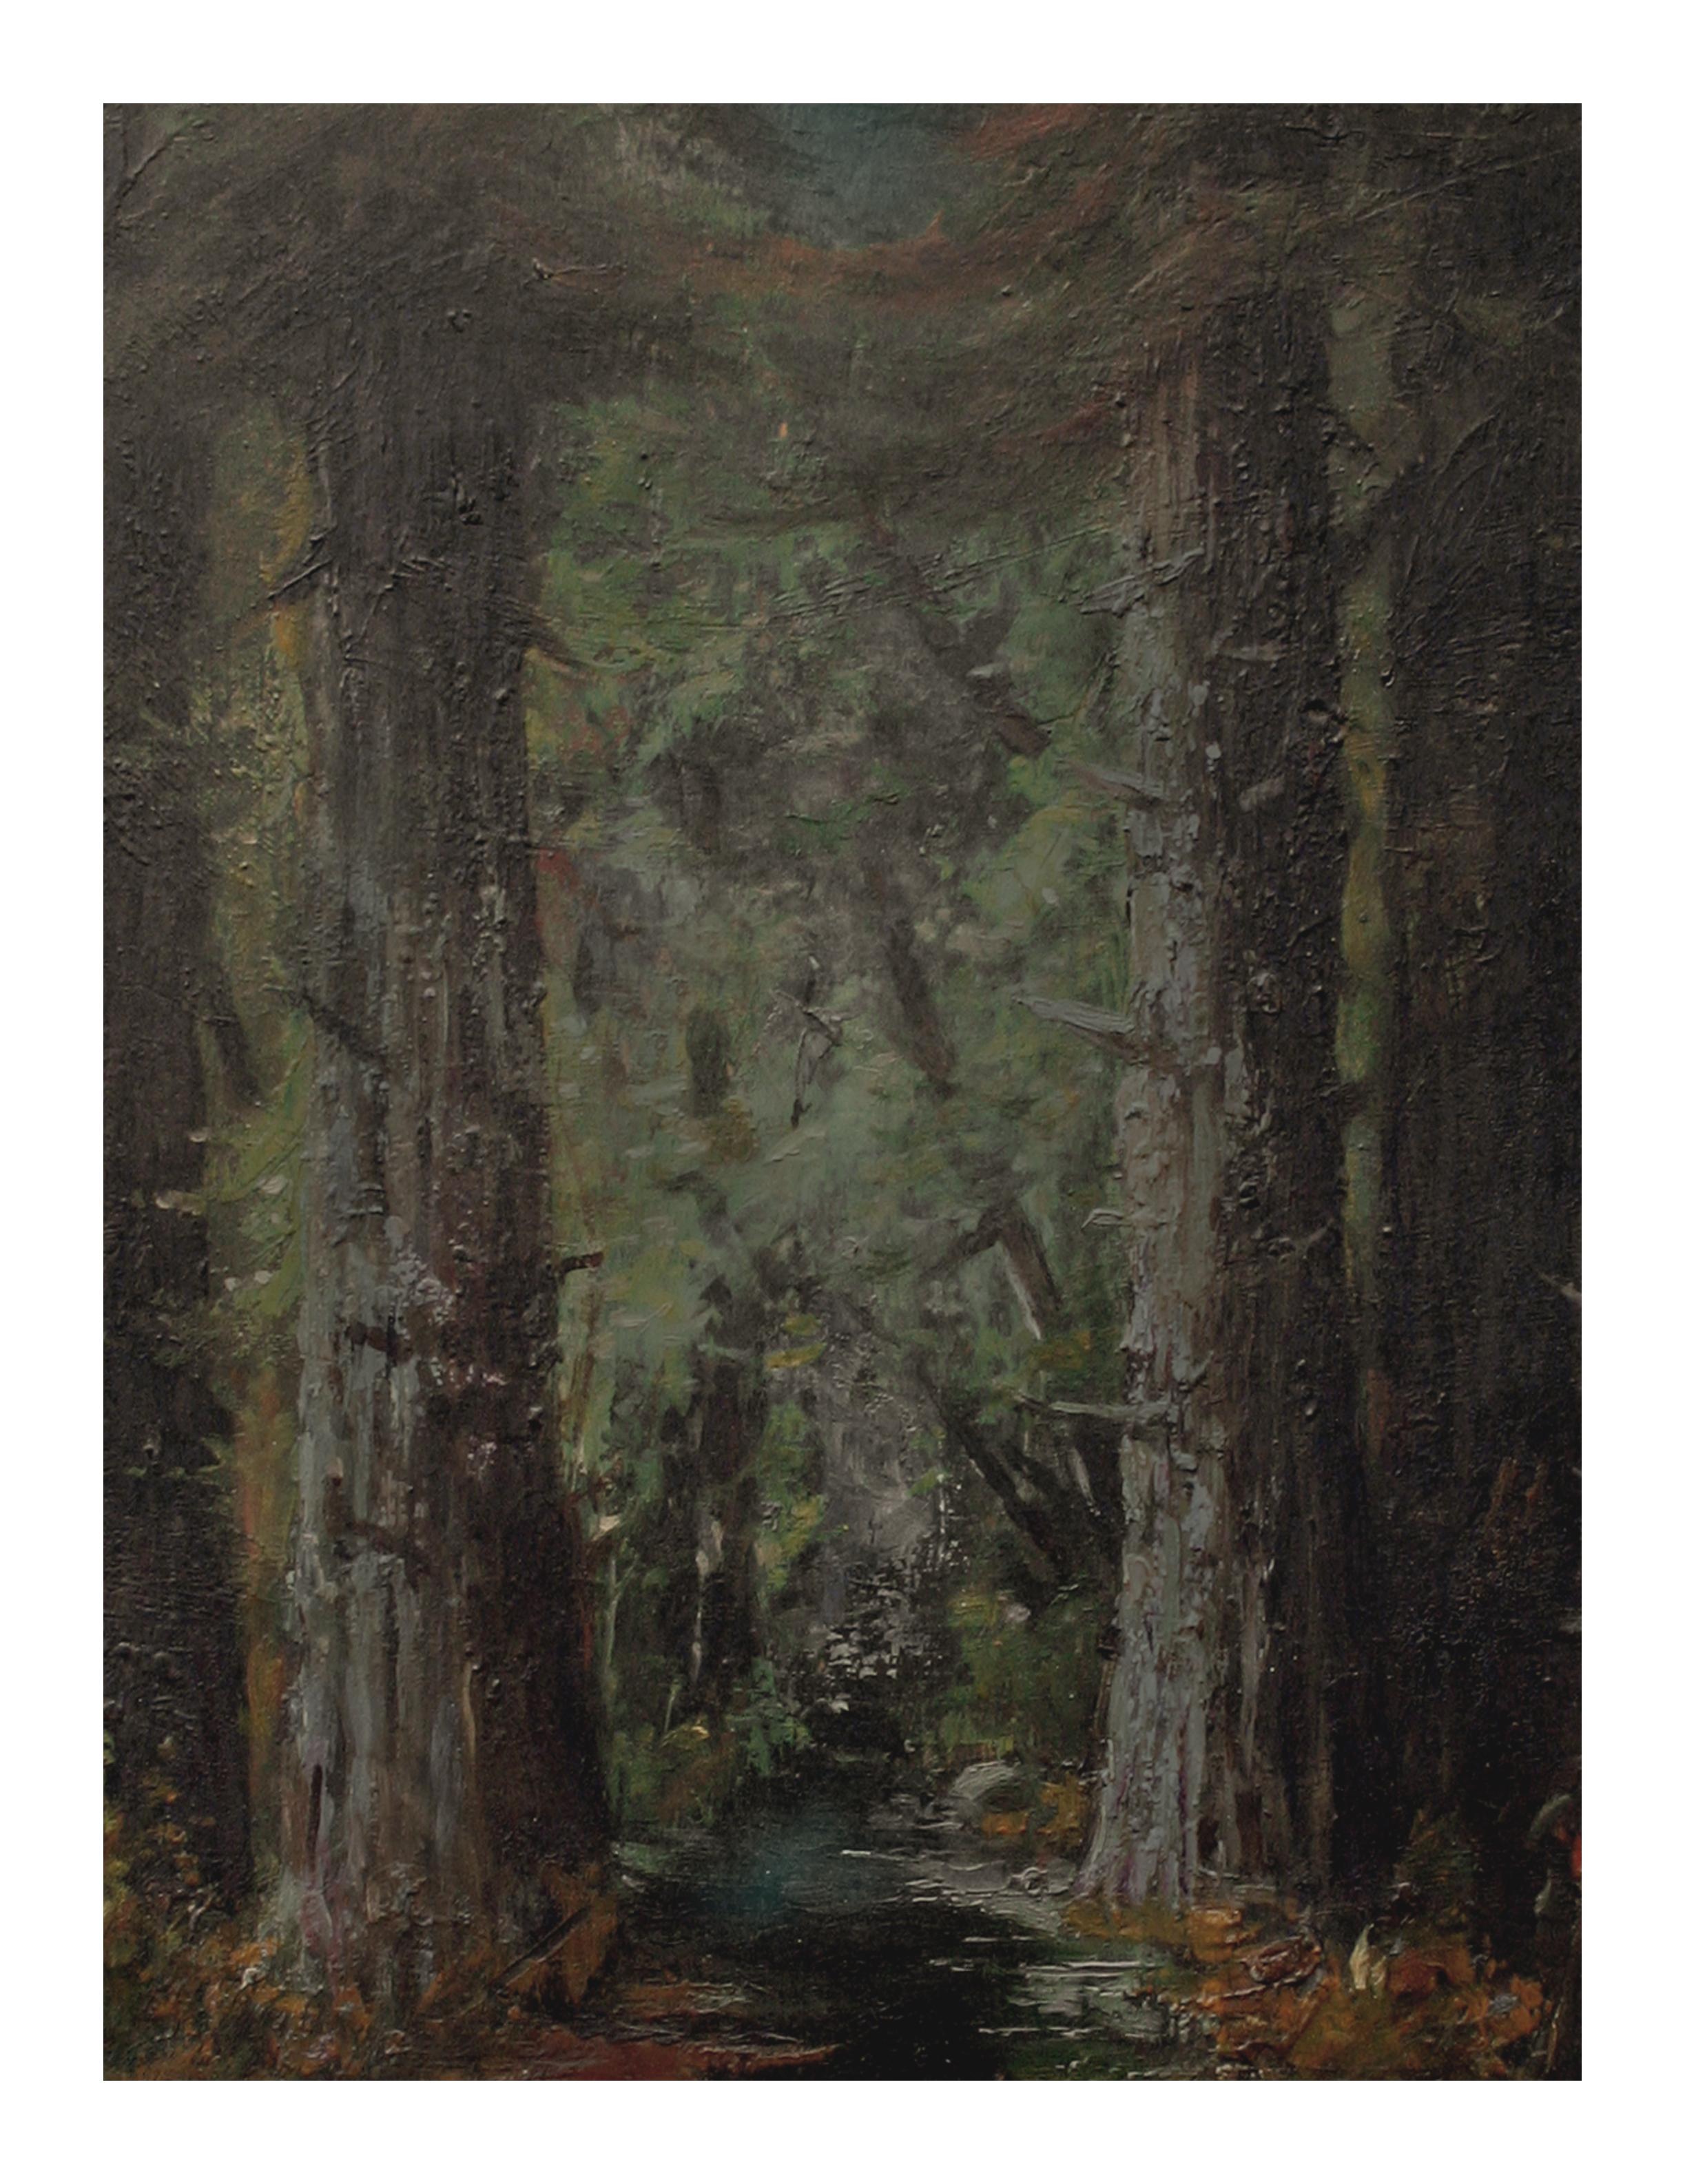 Late 19th Century California Redwood Landscape - Painting by Alphonso Herman Broad